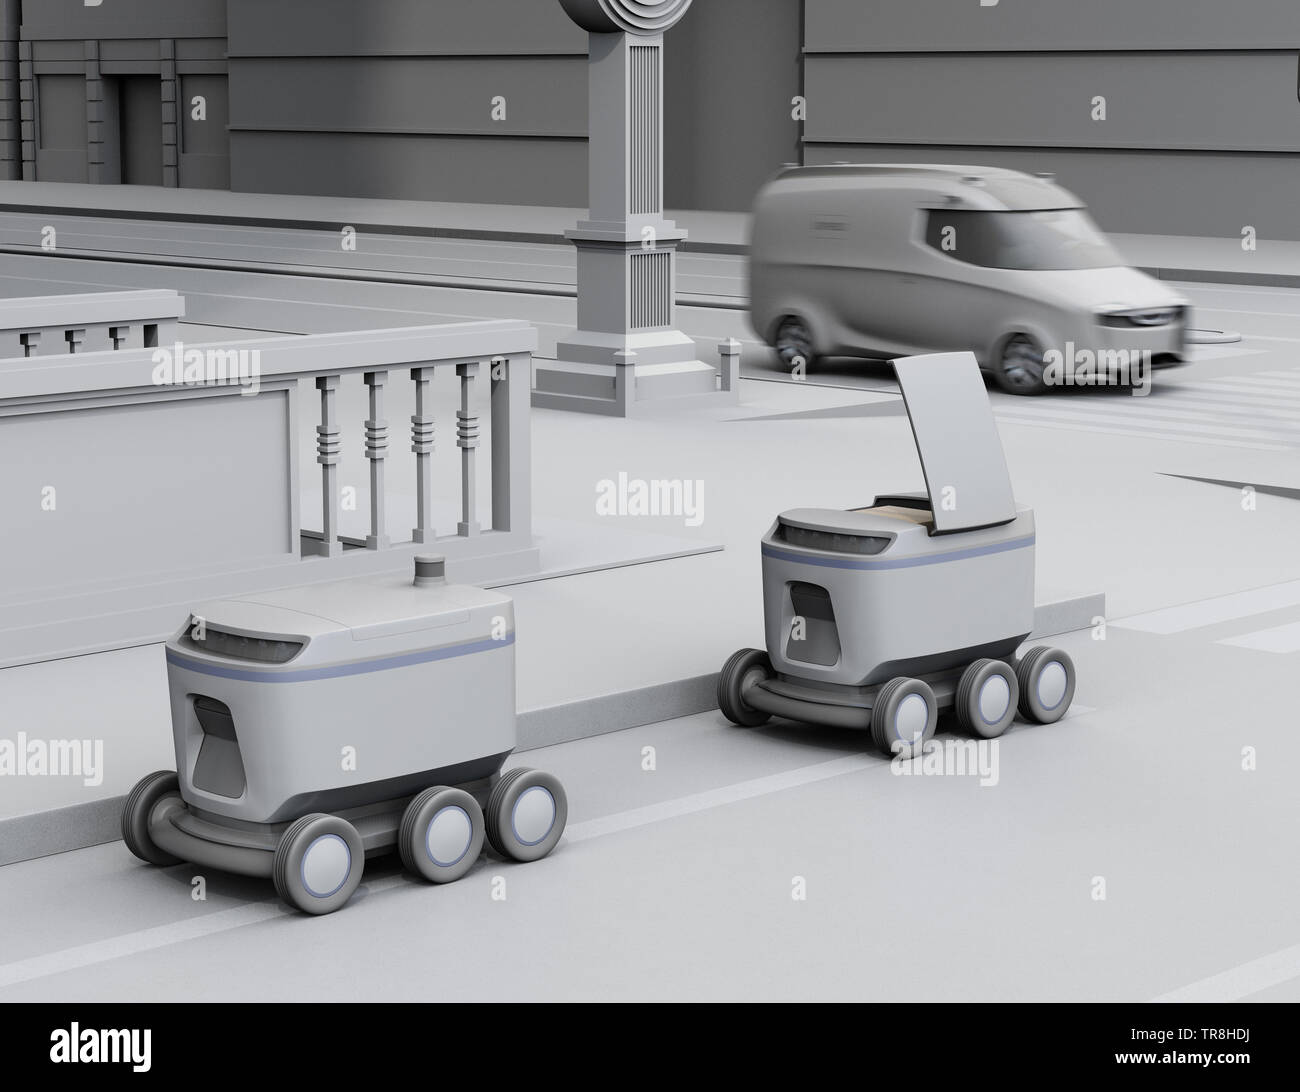 Clay rendering of self-driving delivery robots and delivery van on the street. 3D rendering image. Stock Photo